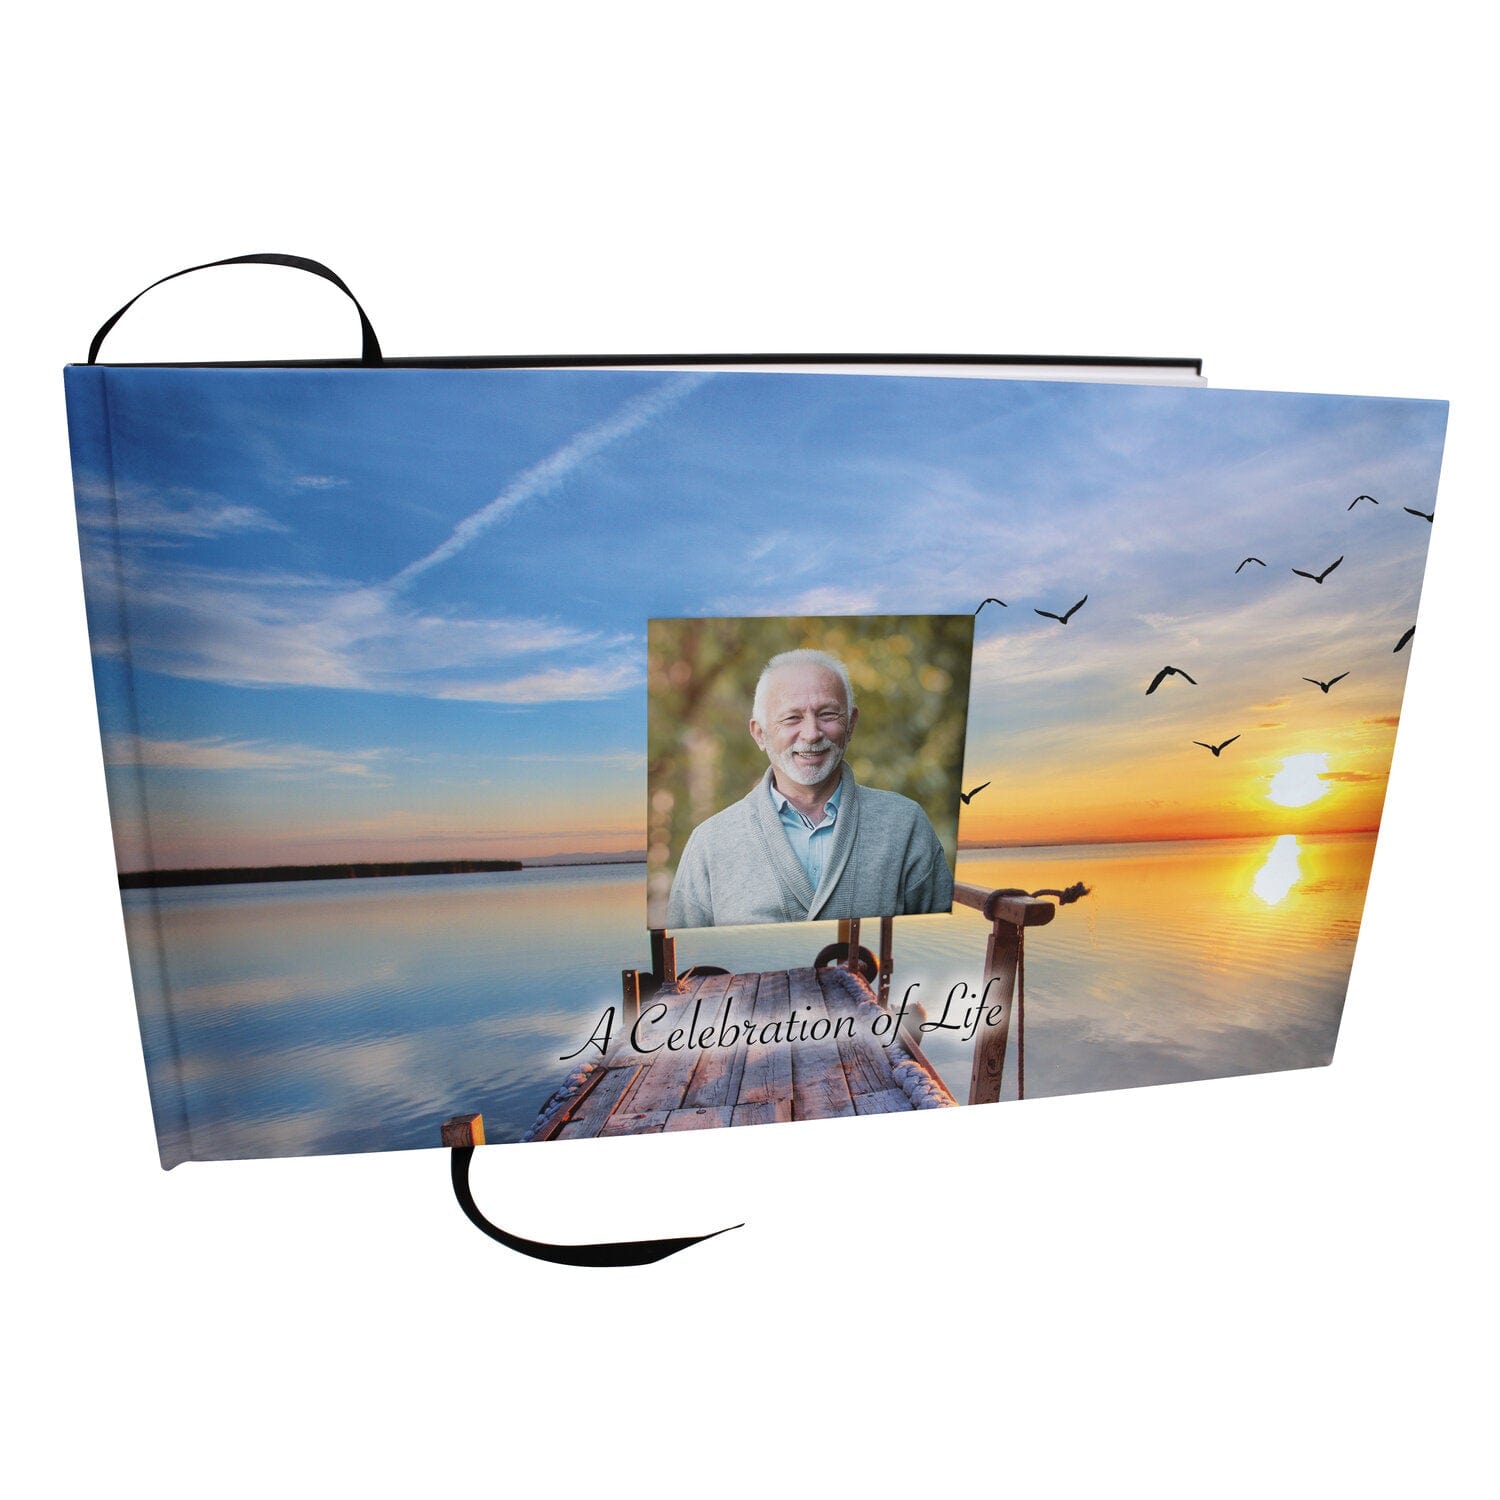 Commemorative Cremation Urns Dock of the Bay Sunset Matching Themed 'Celebration of Life' Guest Book for Funeral or Memorial Service